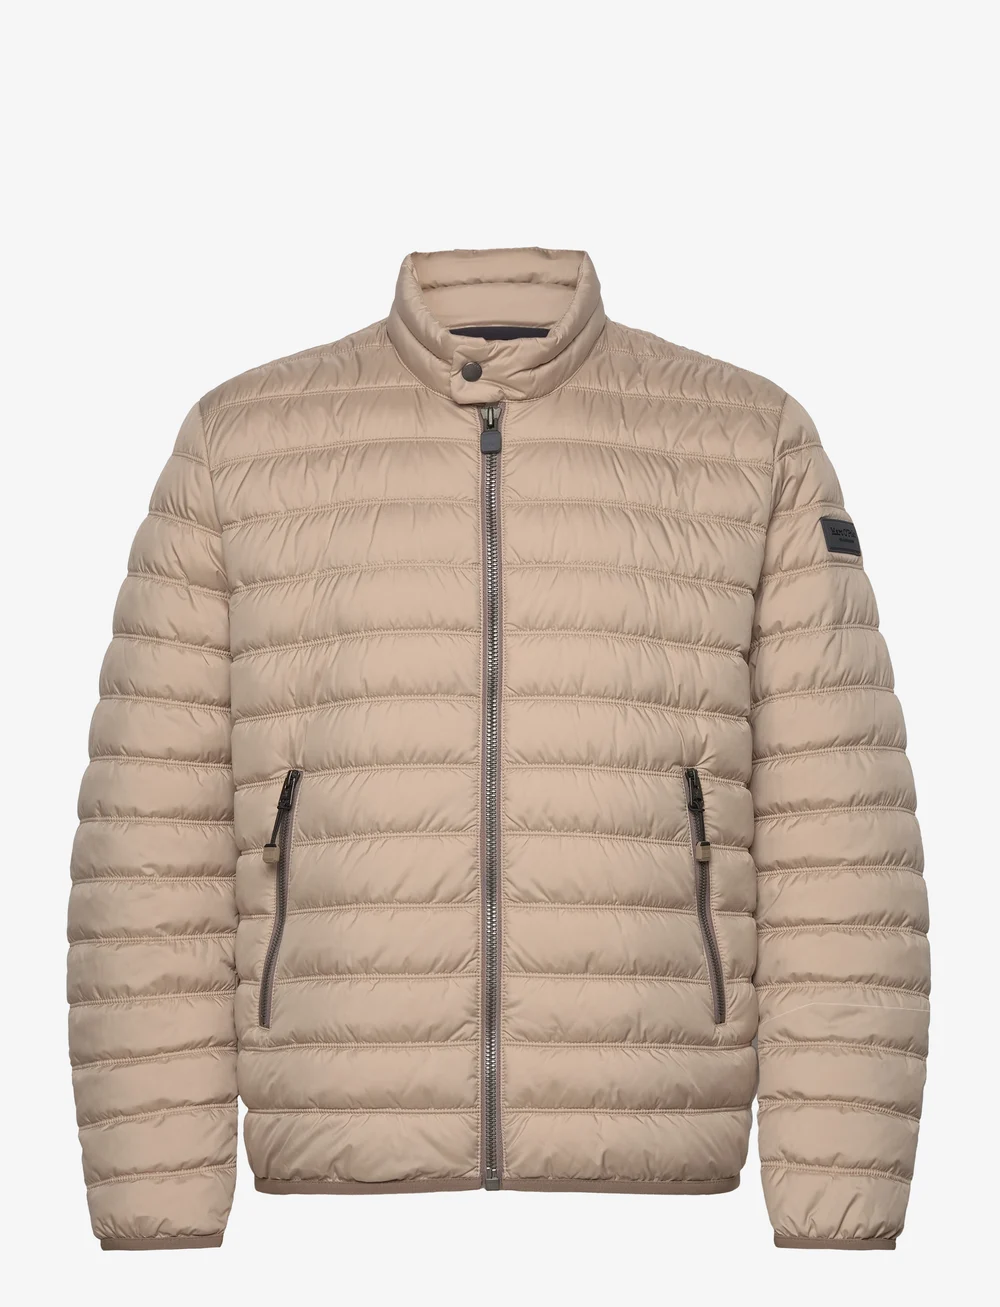 Marc O\'Polo Woven Outdoor Jackets - 107.97 €. Buy Padded jackets from Marc  O\'Polo online at Boozt.com. Fast delivery and easy returns